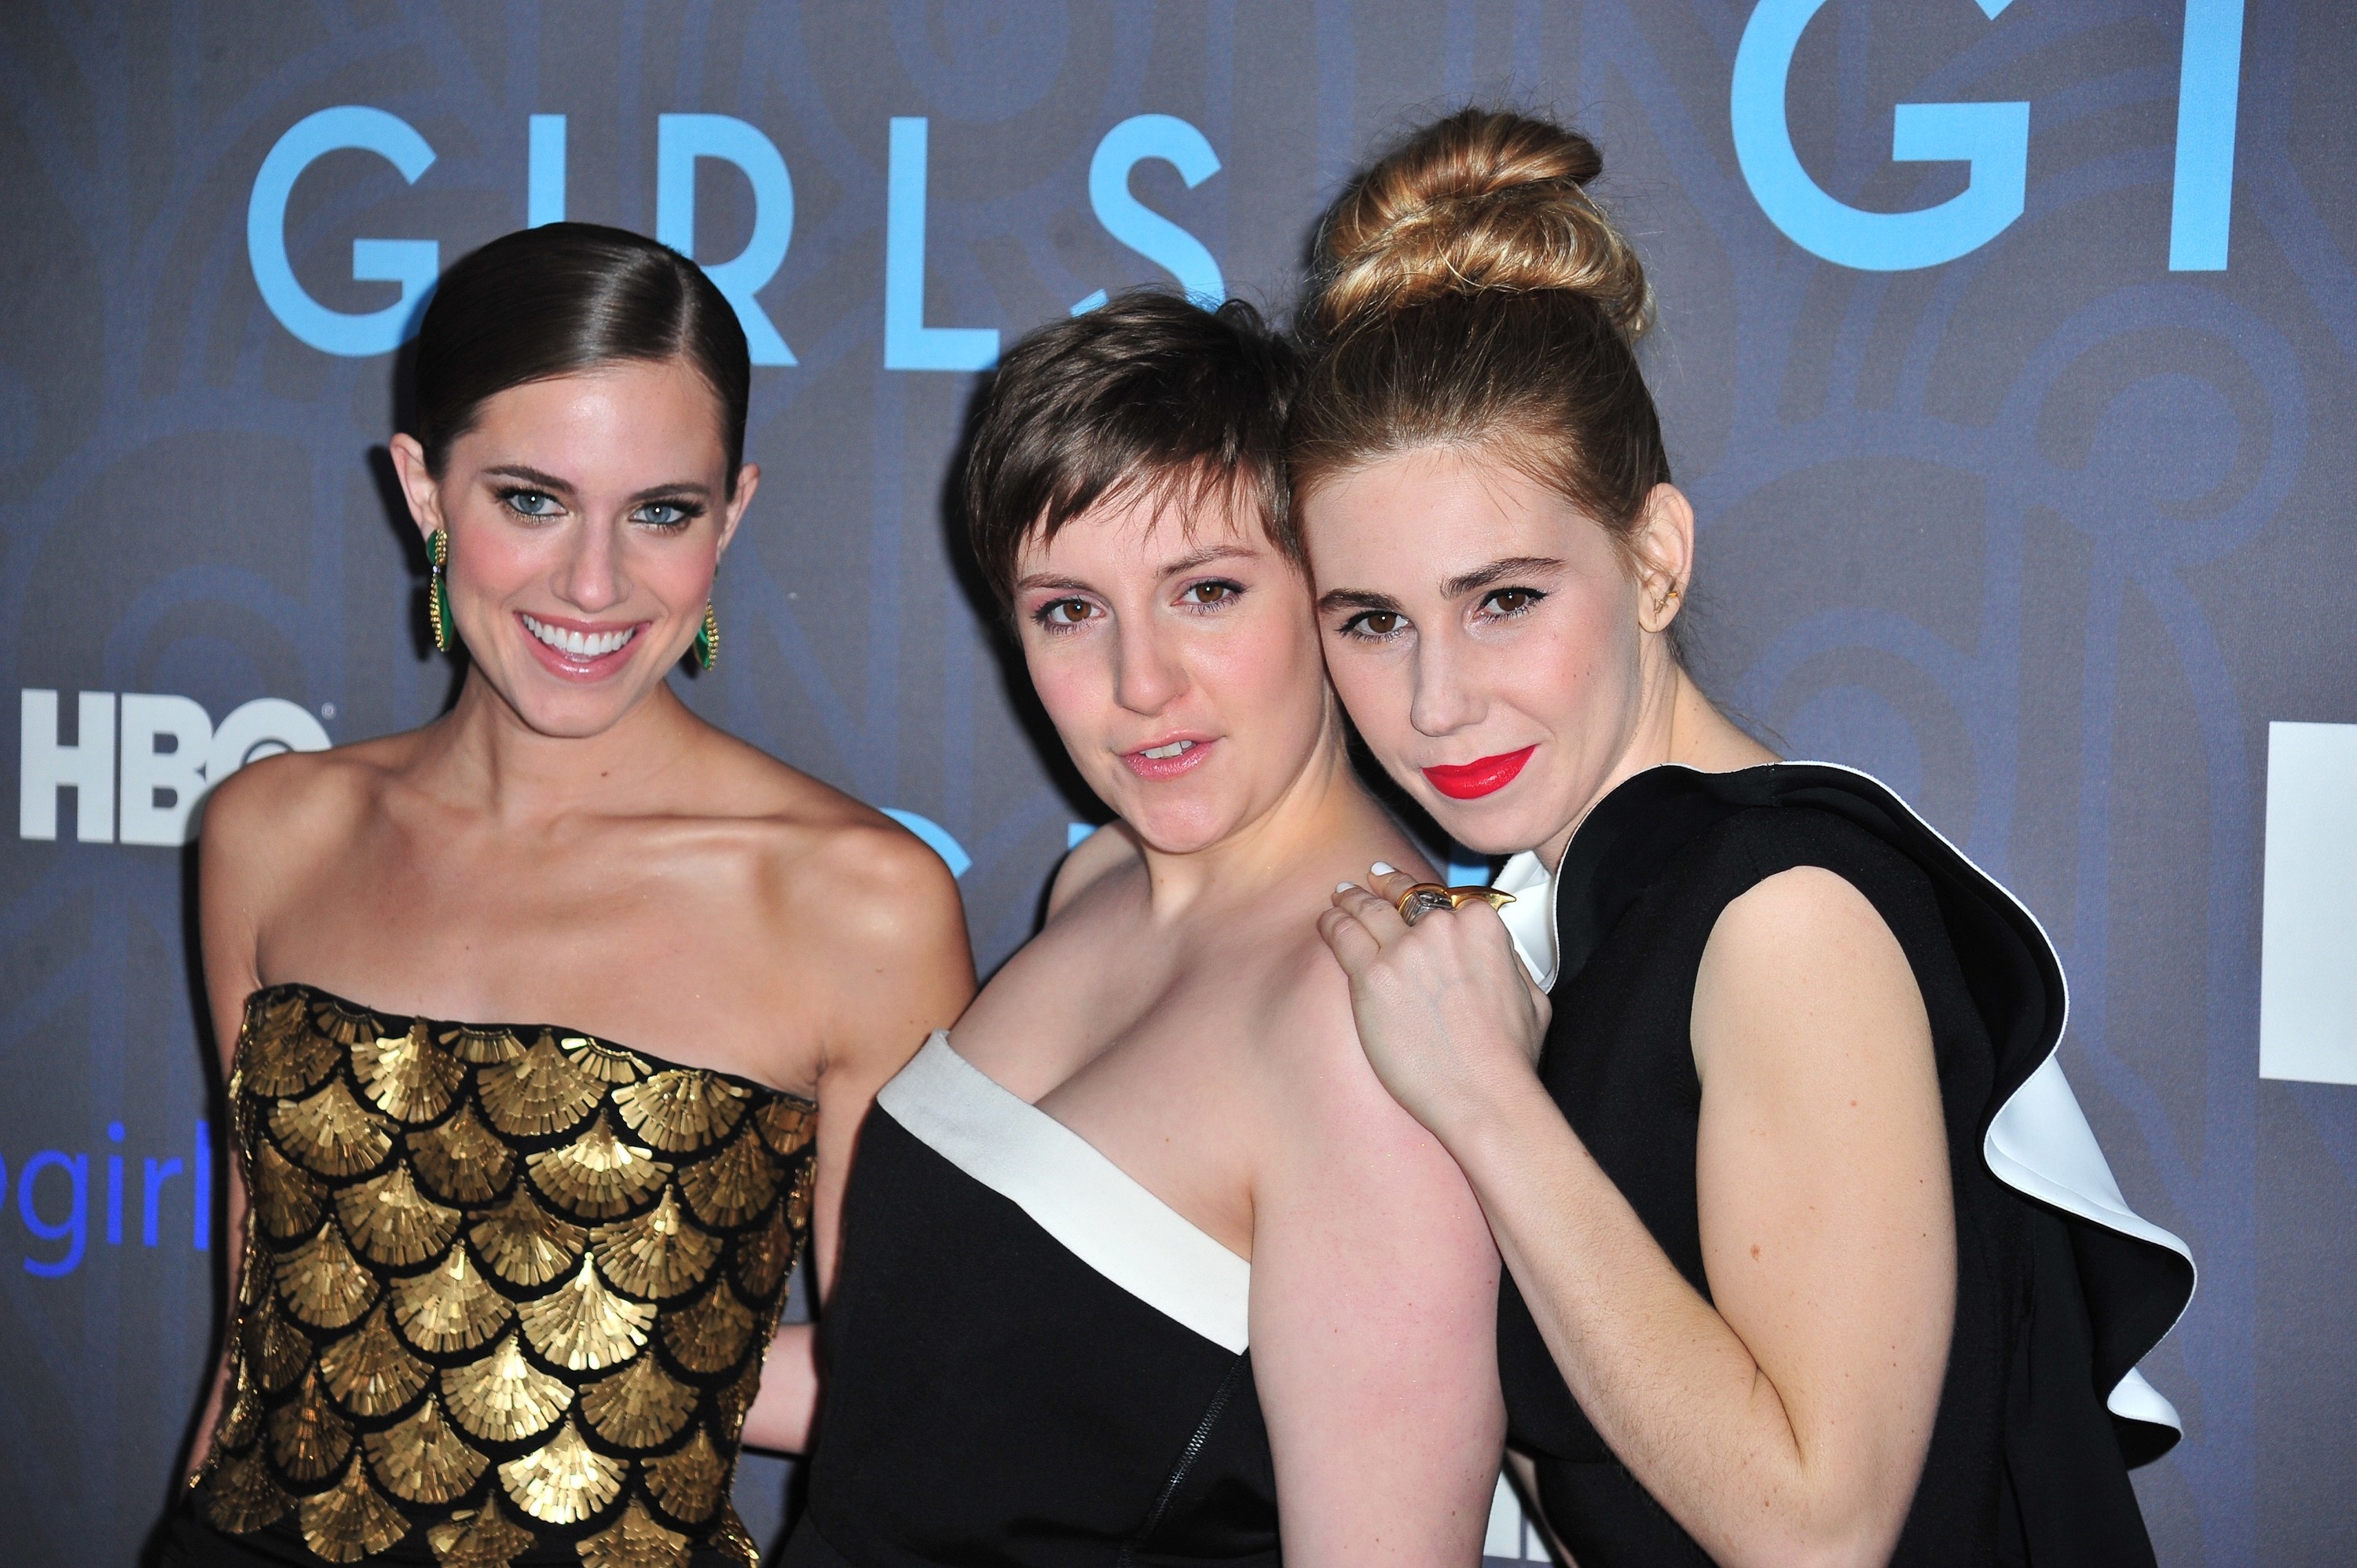 Williams, Dunham, and Mamet pose for a photo on the red carpet